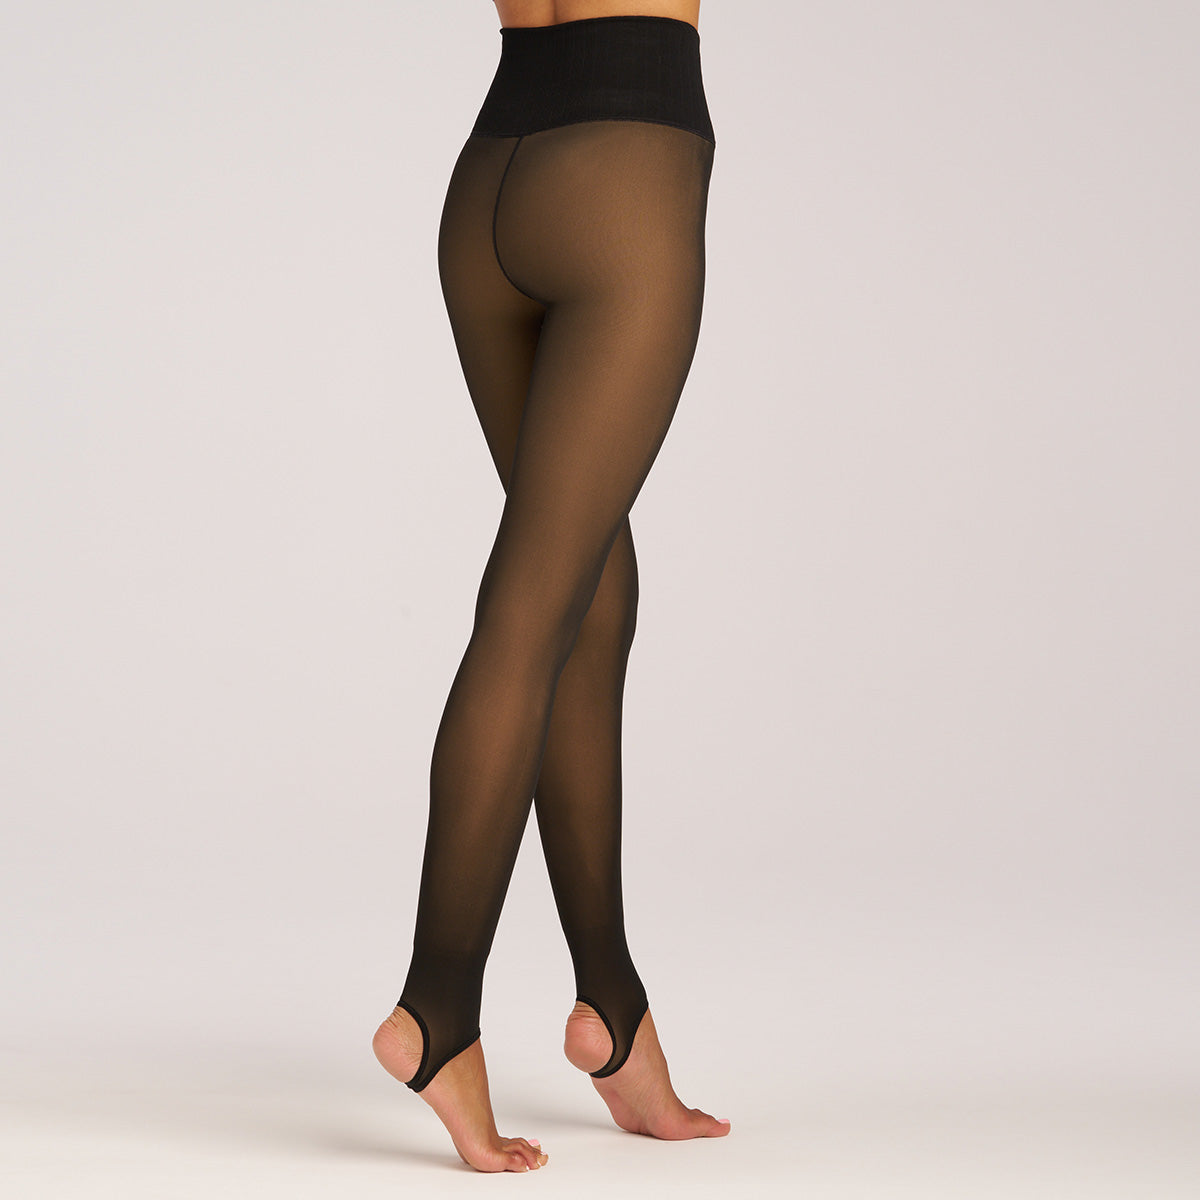 Translucent collection: Sheer tights